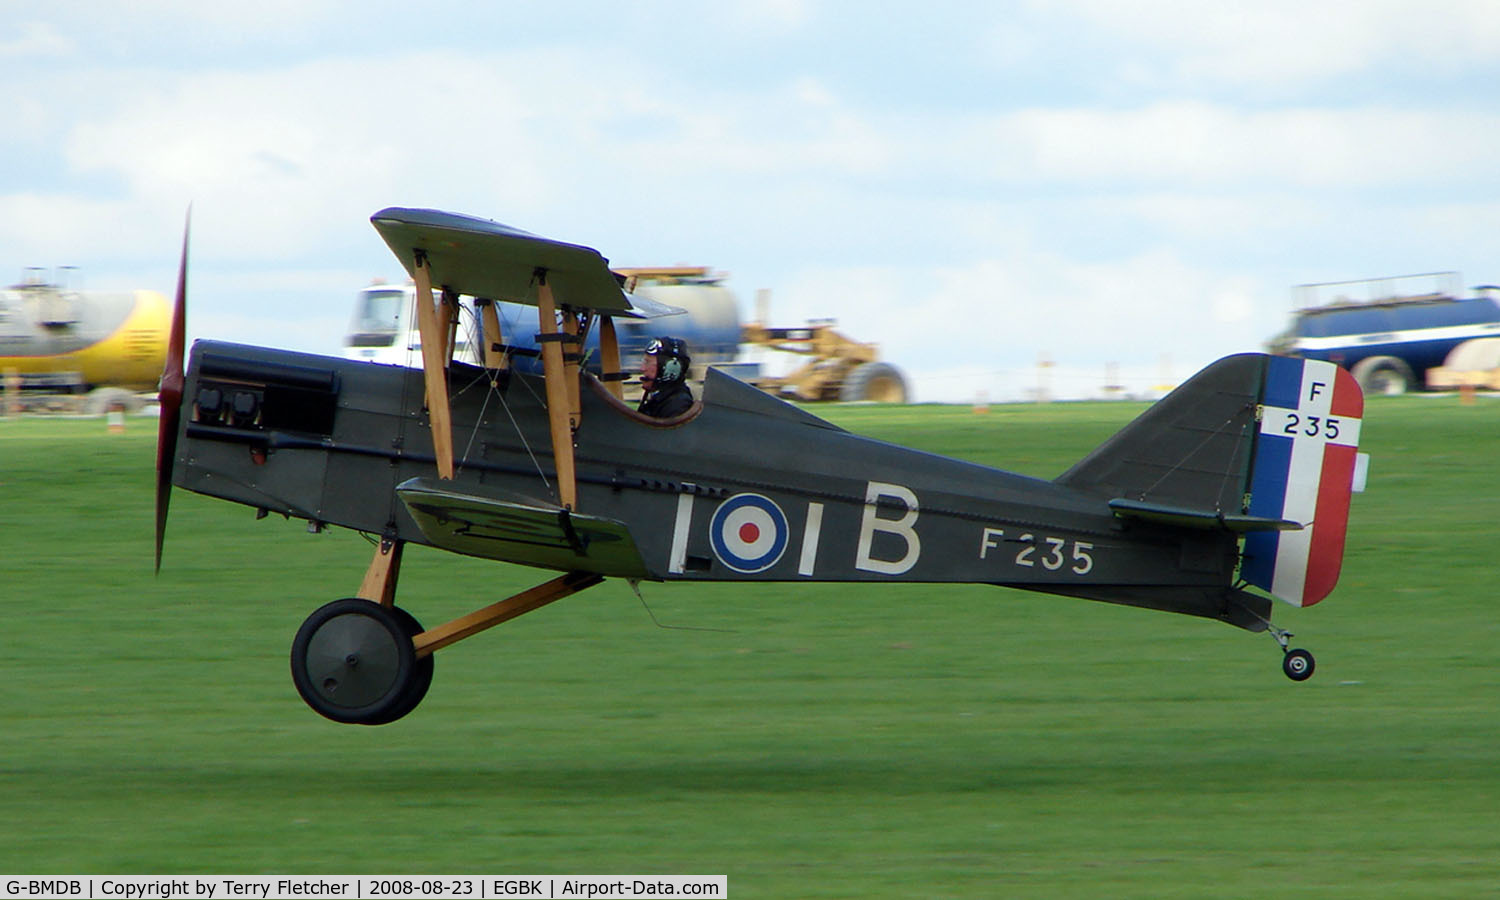 G-BMDB, 1988 Royal Aircraft Factory SE-5A Replica C/N PFA 020-10931, Visitor to Sywell on 2008 Ragwing Fly-in day